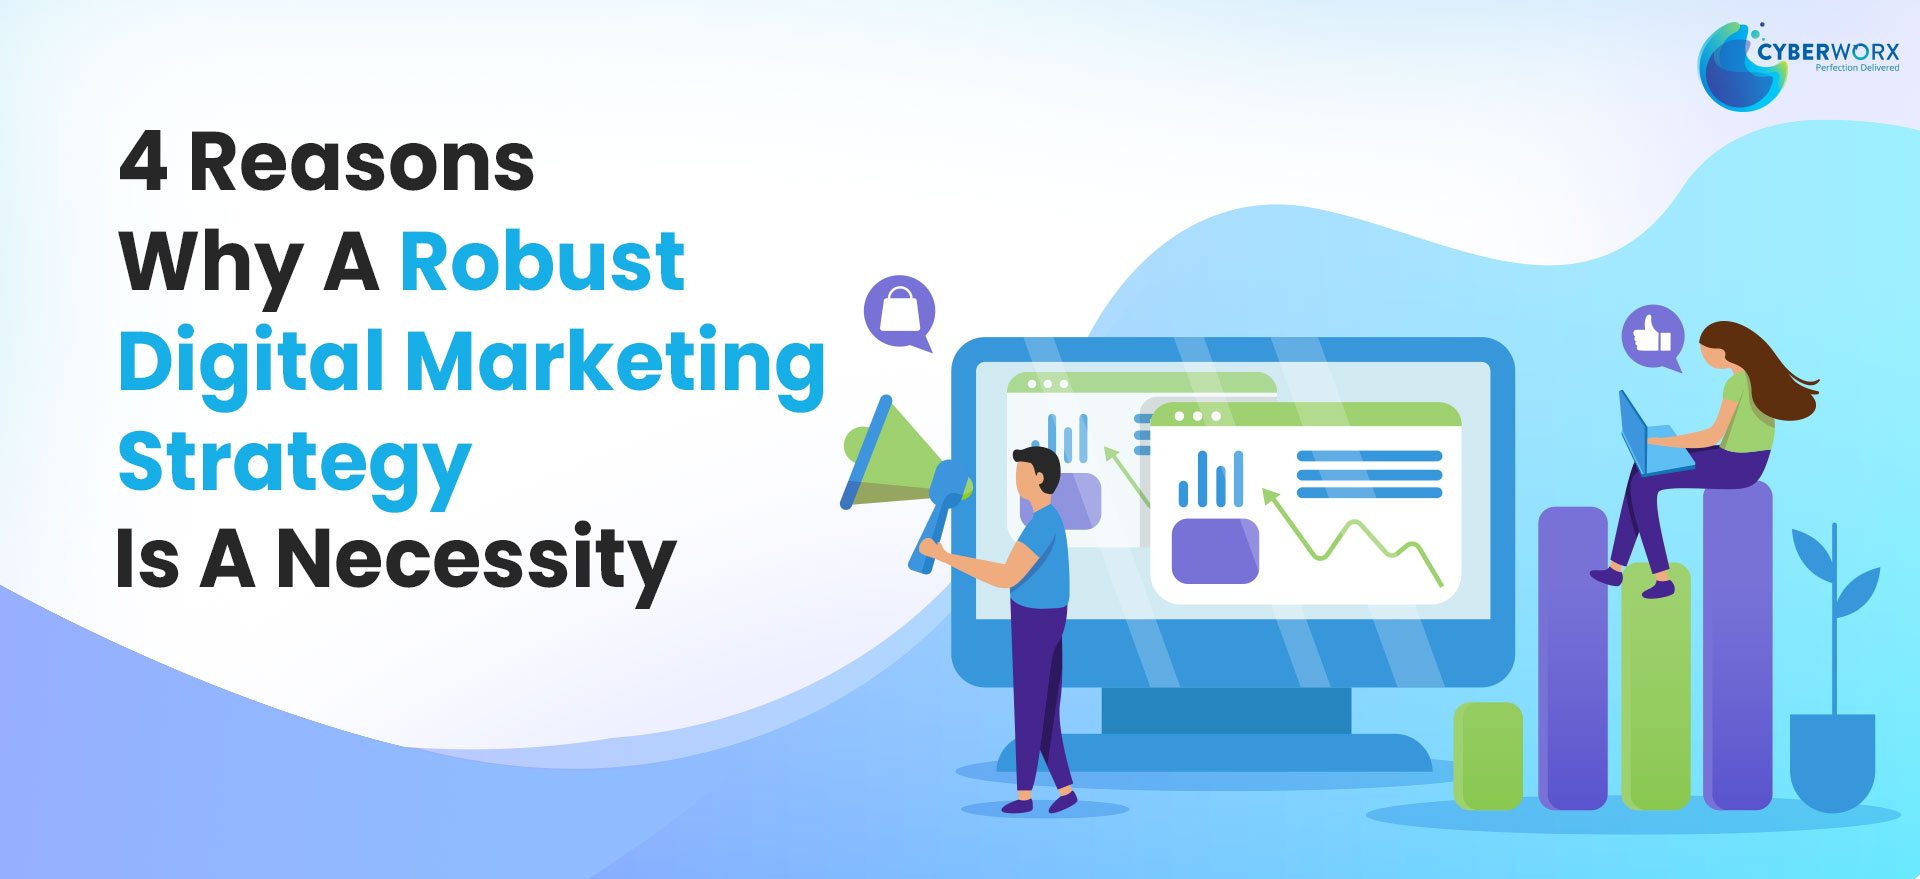 4 Reasons Why A Robust Digital Marketing Strategy is Necessary